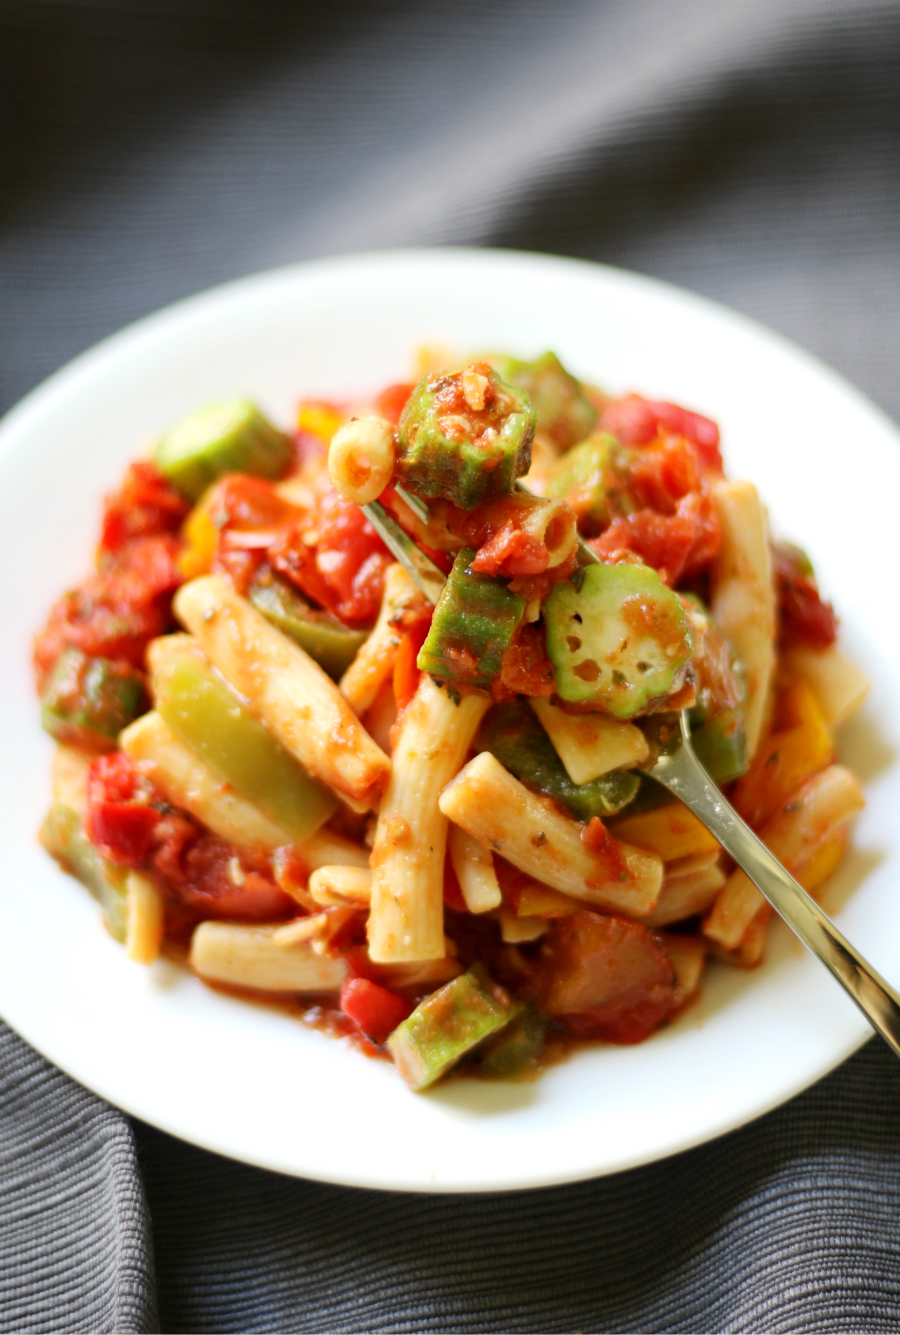 One-Pot Cajun Pasta (Gluten-Free, Vegan) | Strength and Sunshine @RebeccaGF666 An easy One-Pot Cajun Pasta dinner recipe that's allergy-free, gluten-free, and vegan! A healthy meatless dish filled with bell pepper, okra, tomatoes, and loads of flavorful spices and herbs all mixed together with your favorite pasta!